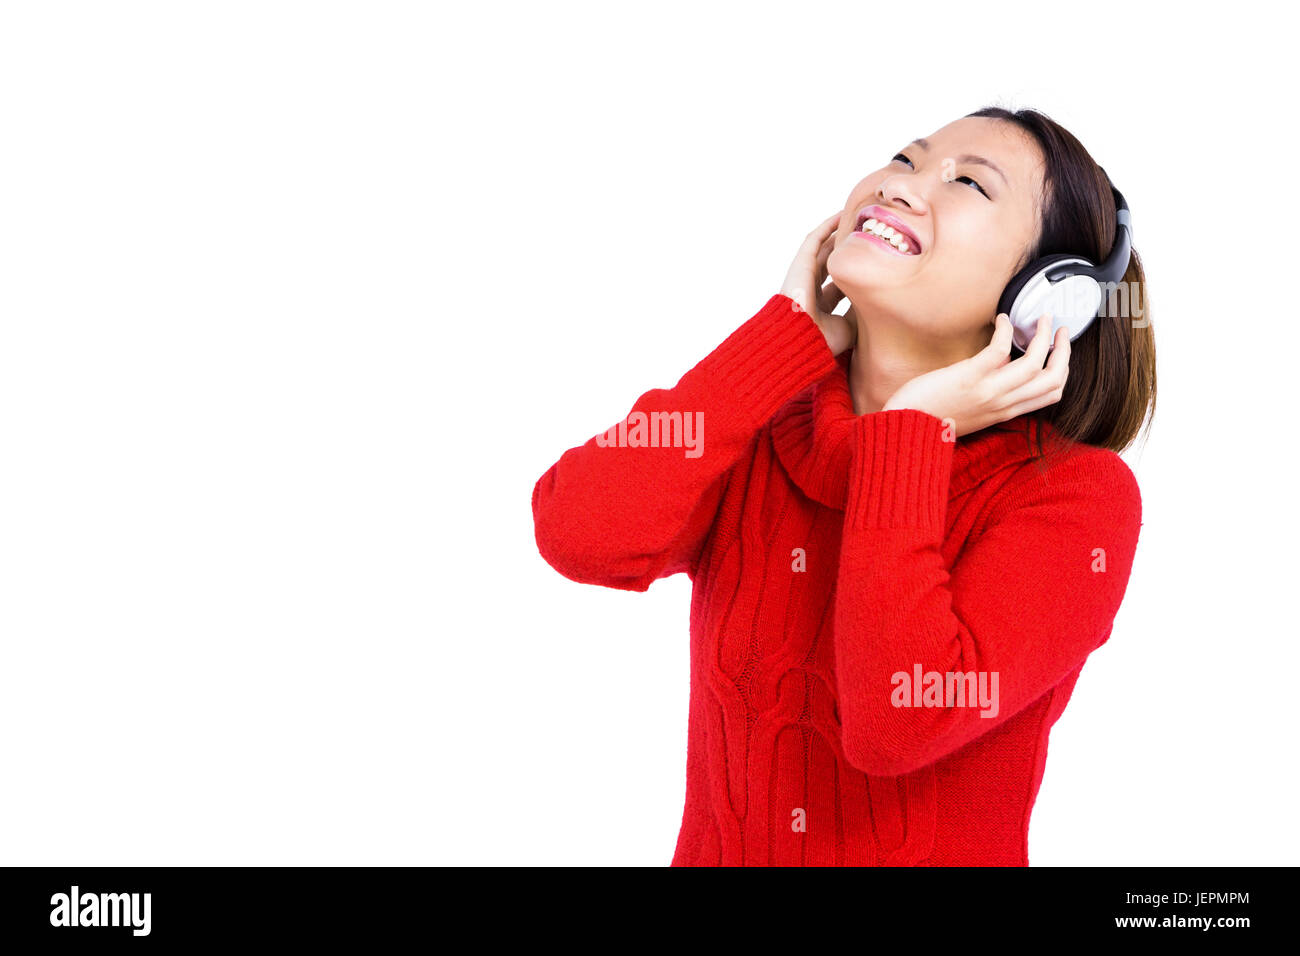 Young woman listening to music on headphone Stock Photo